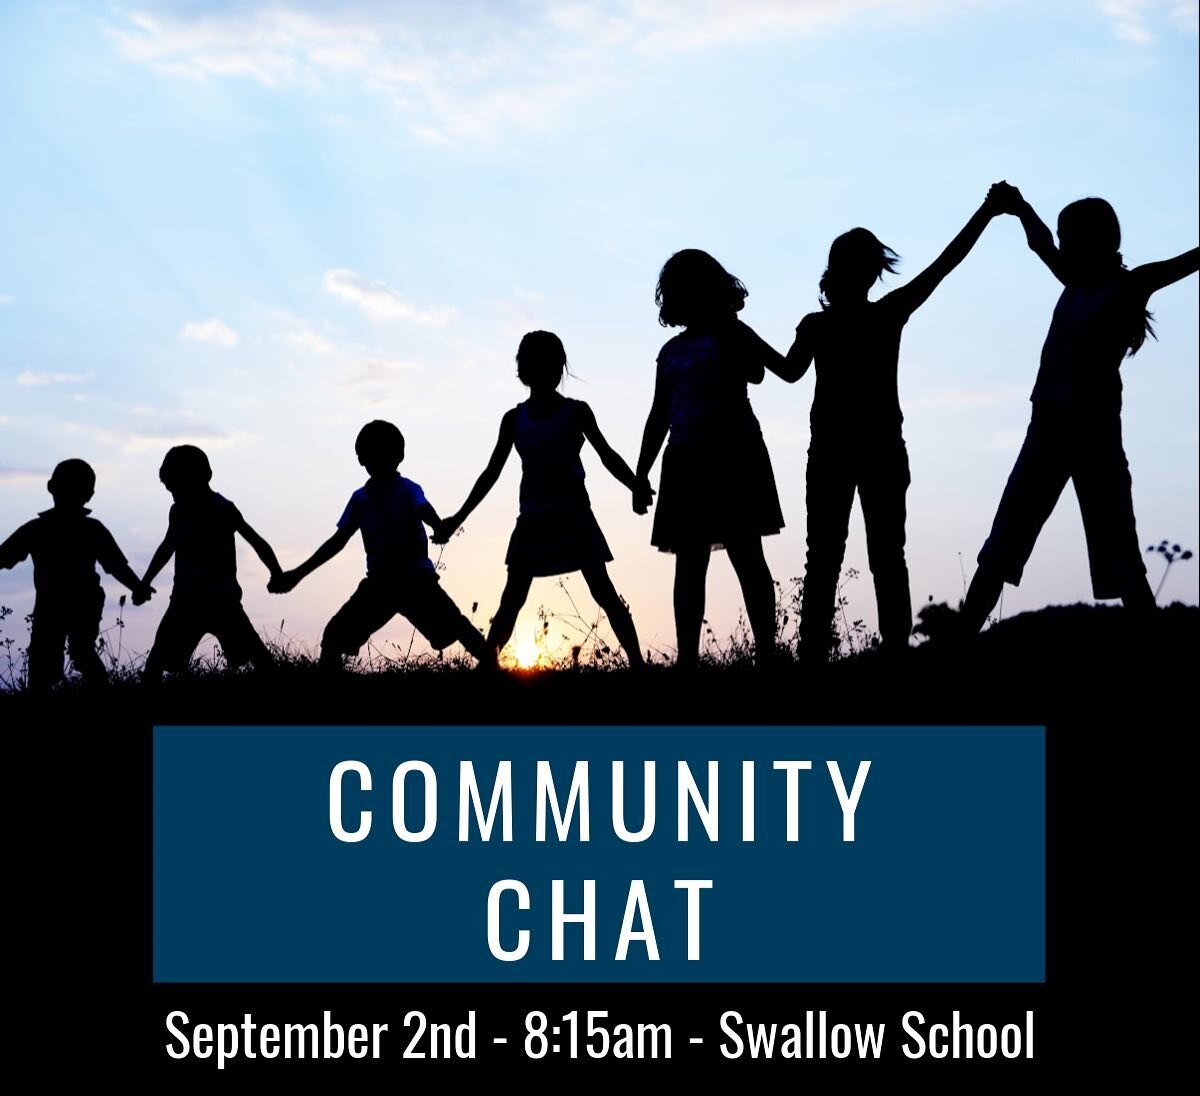 Join us this Friday at 8:15am in the Multipurpose Room for our first SEF Community Chat of the year!
We will be introducing our Swallow Administration and School Board as well as telling you all about the events we have planned this year! There will 